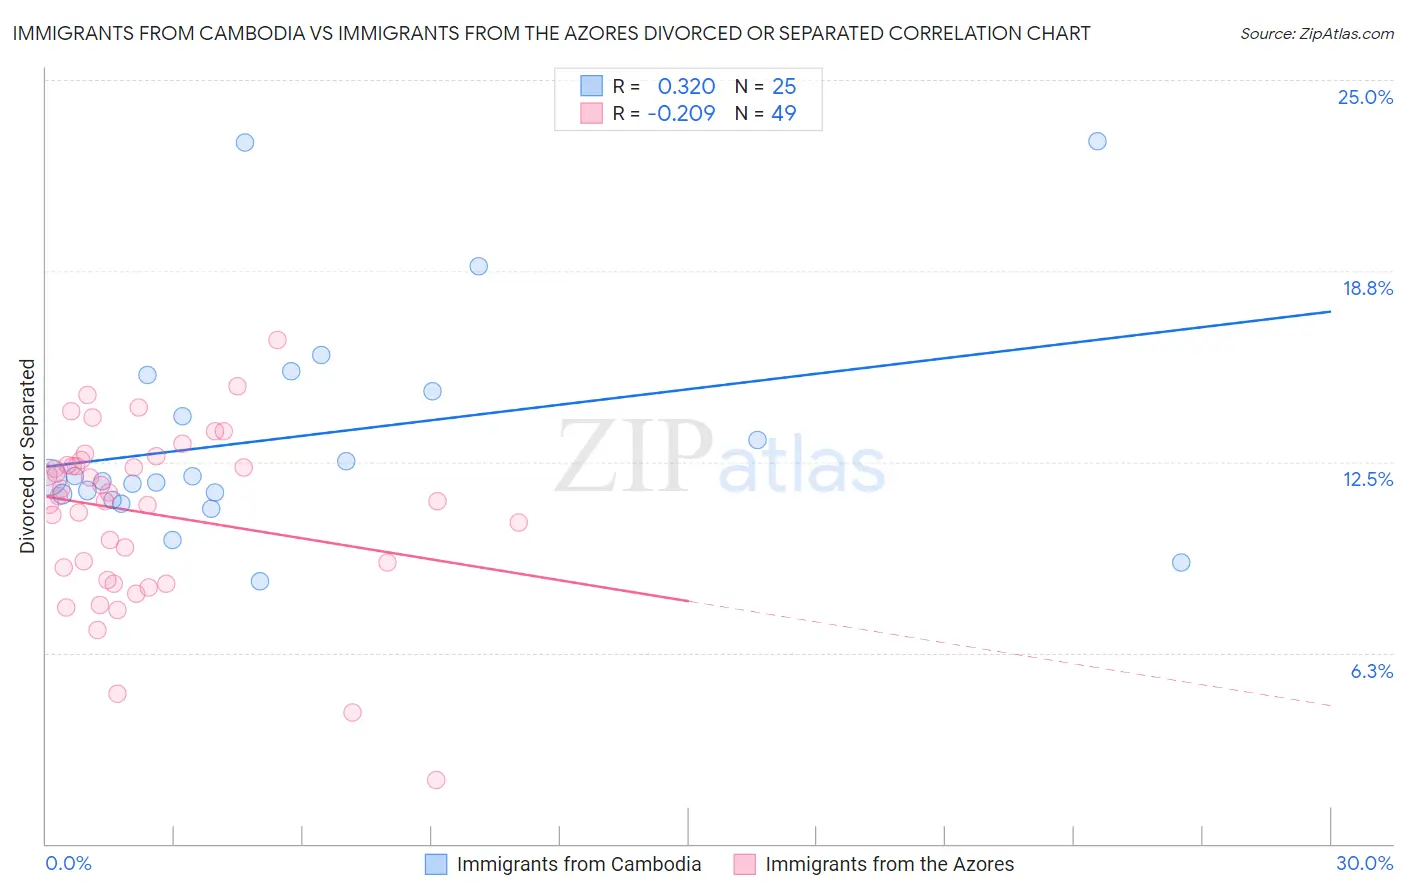 Immigrants from Cambodia vs Immigrants from the Azores Divorced or Separated